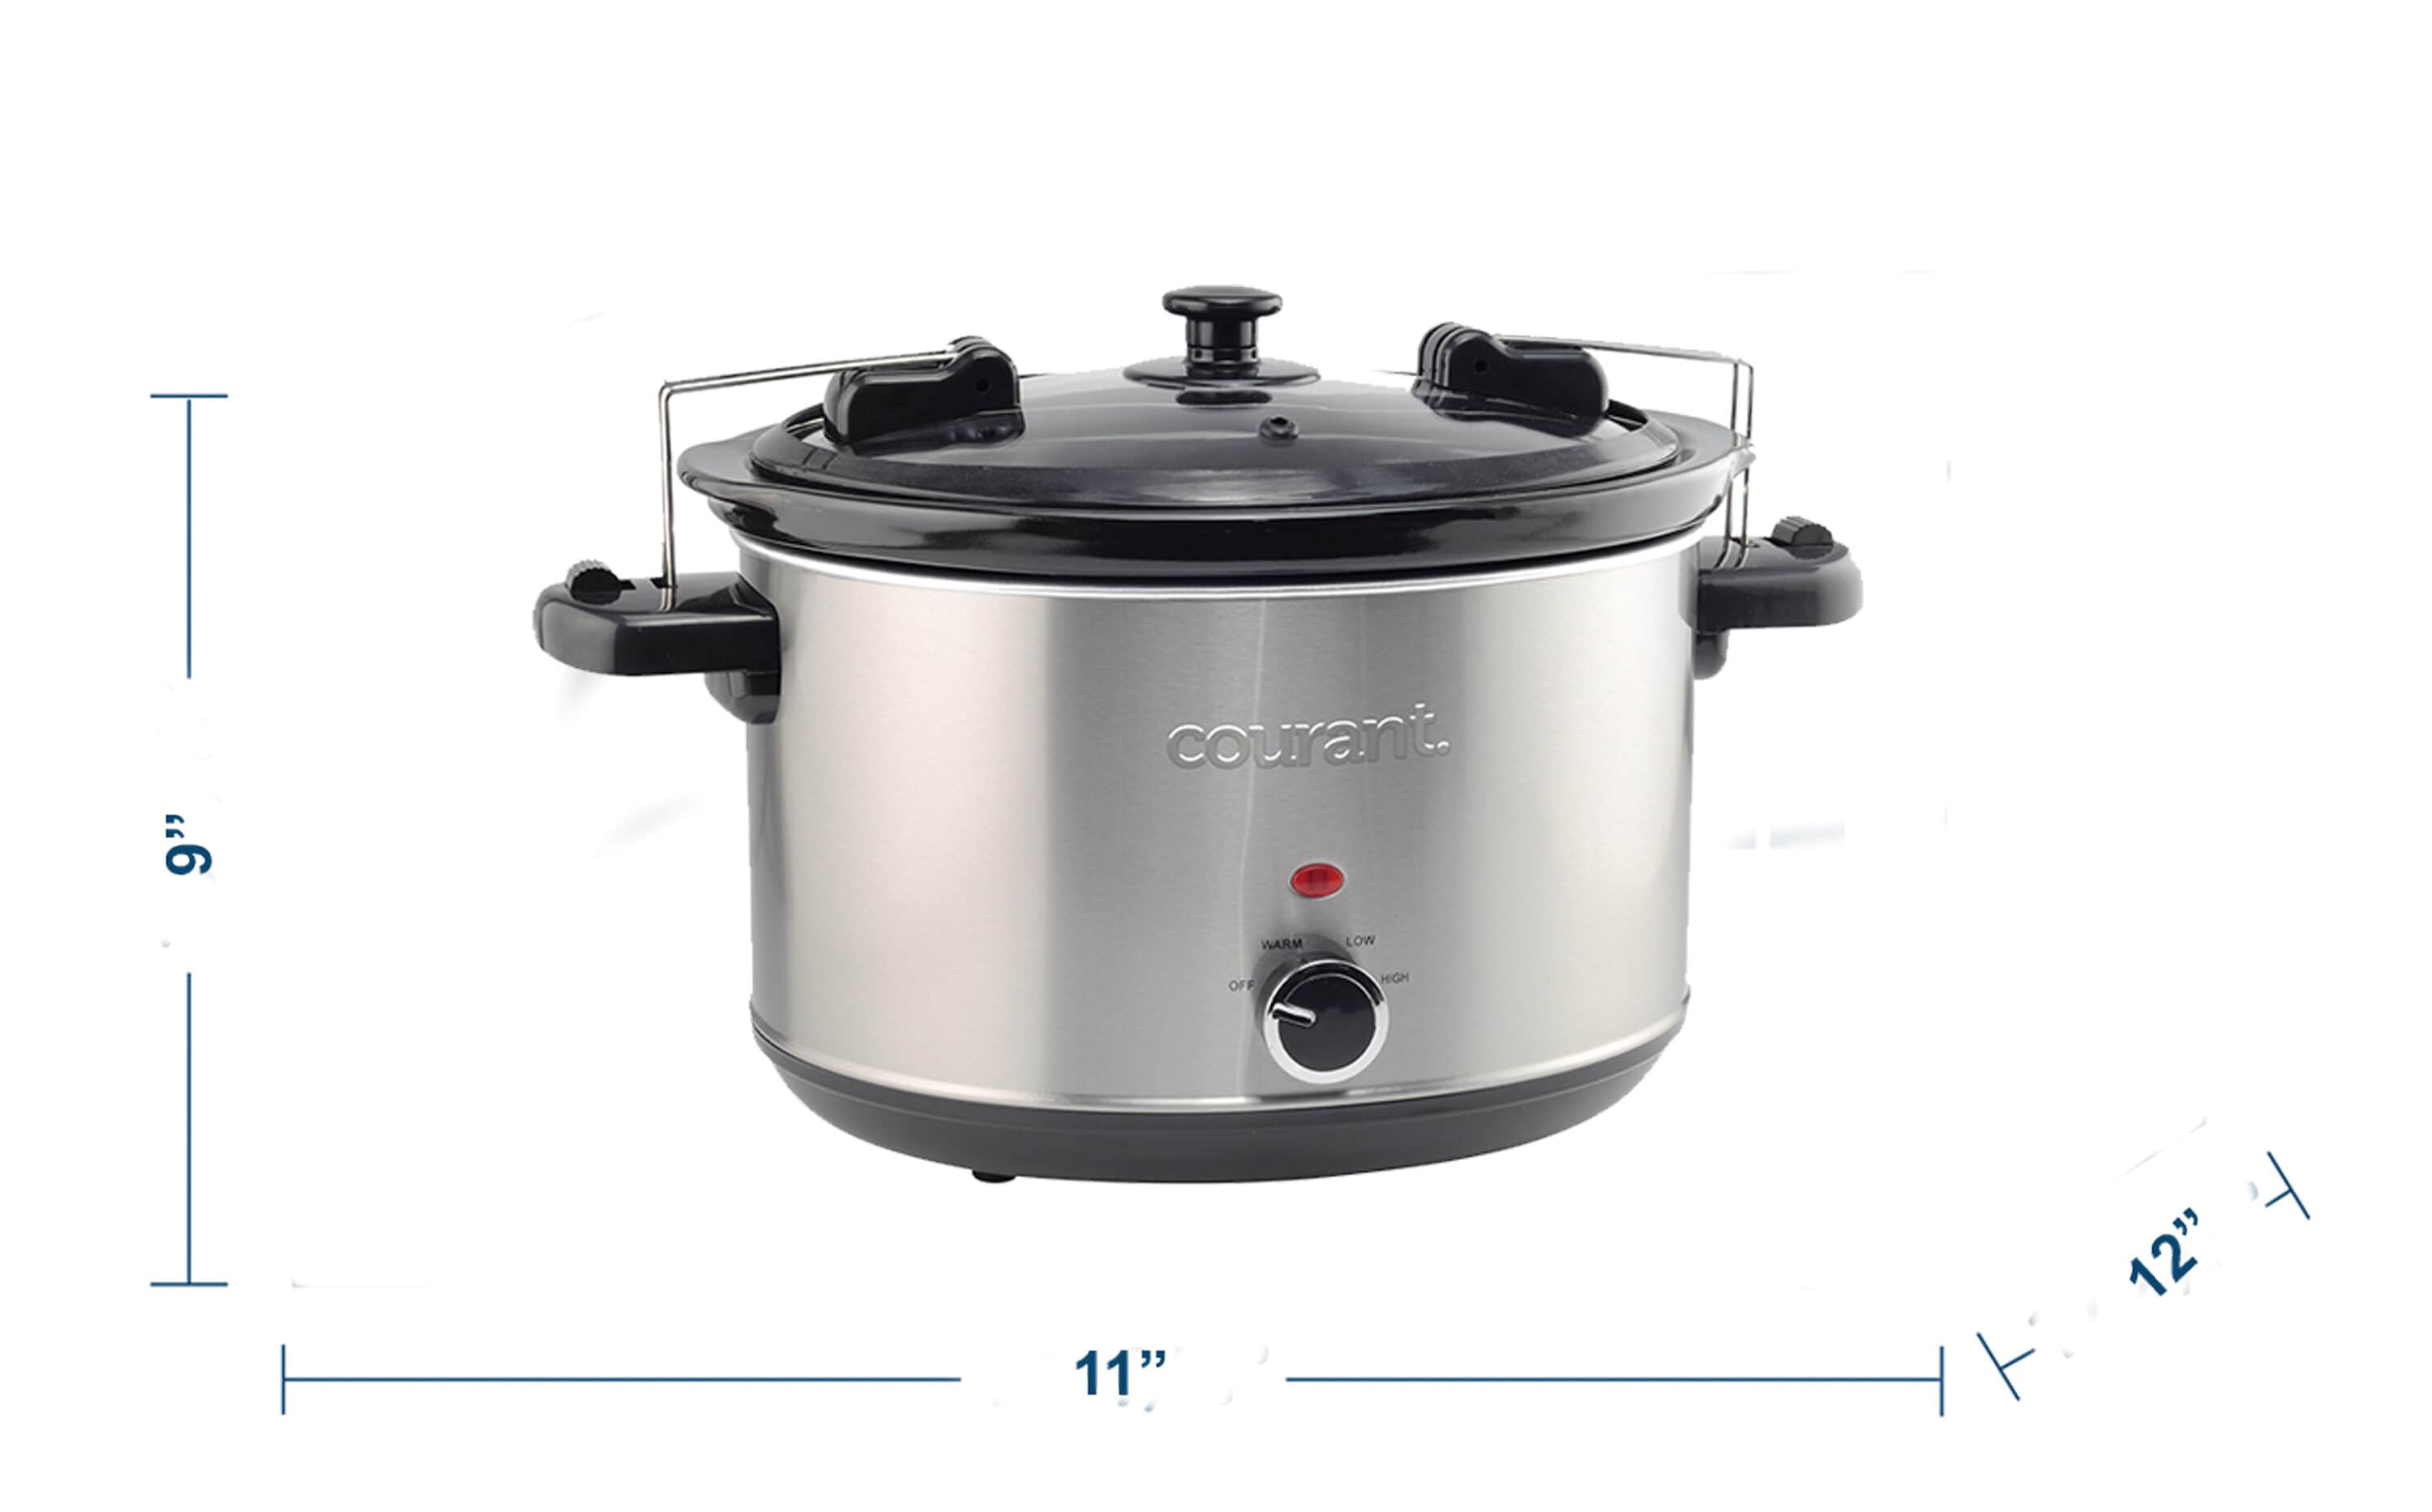 Courant 6-Quart Round Slow Cooker in Cookers department at Lowes.com